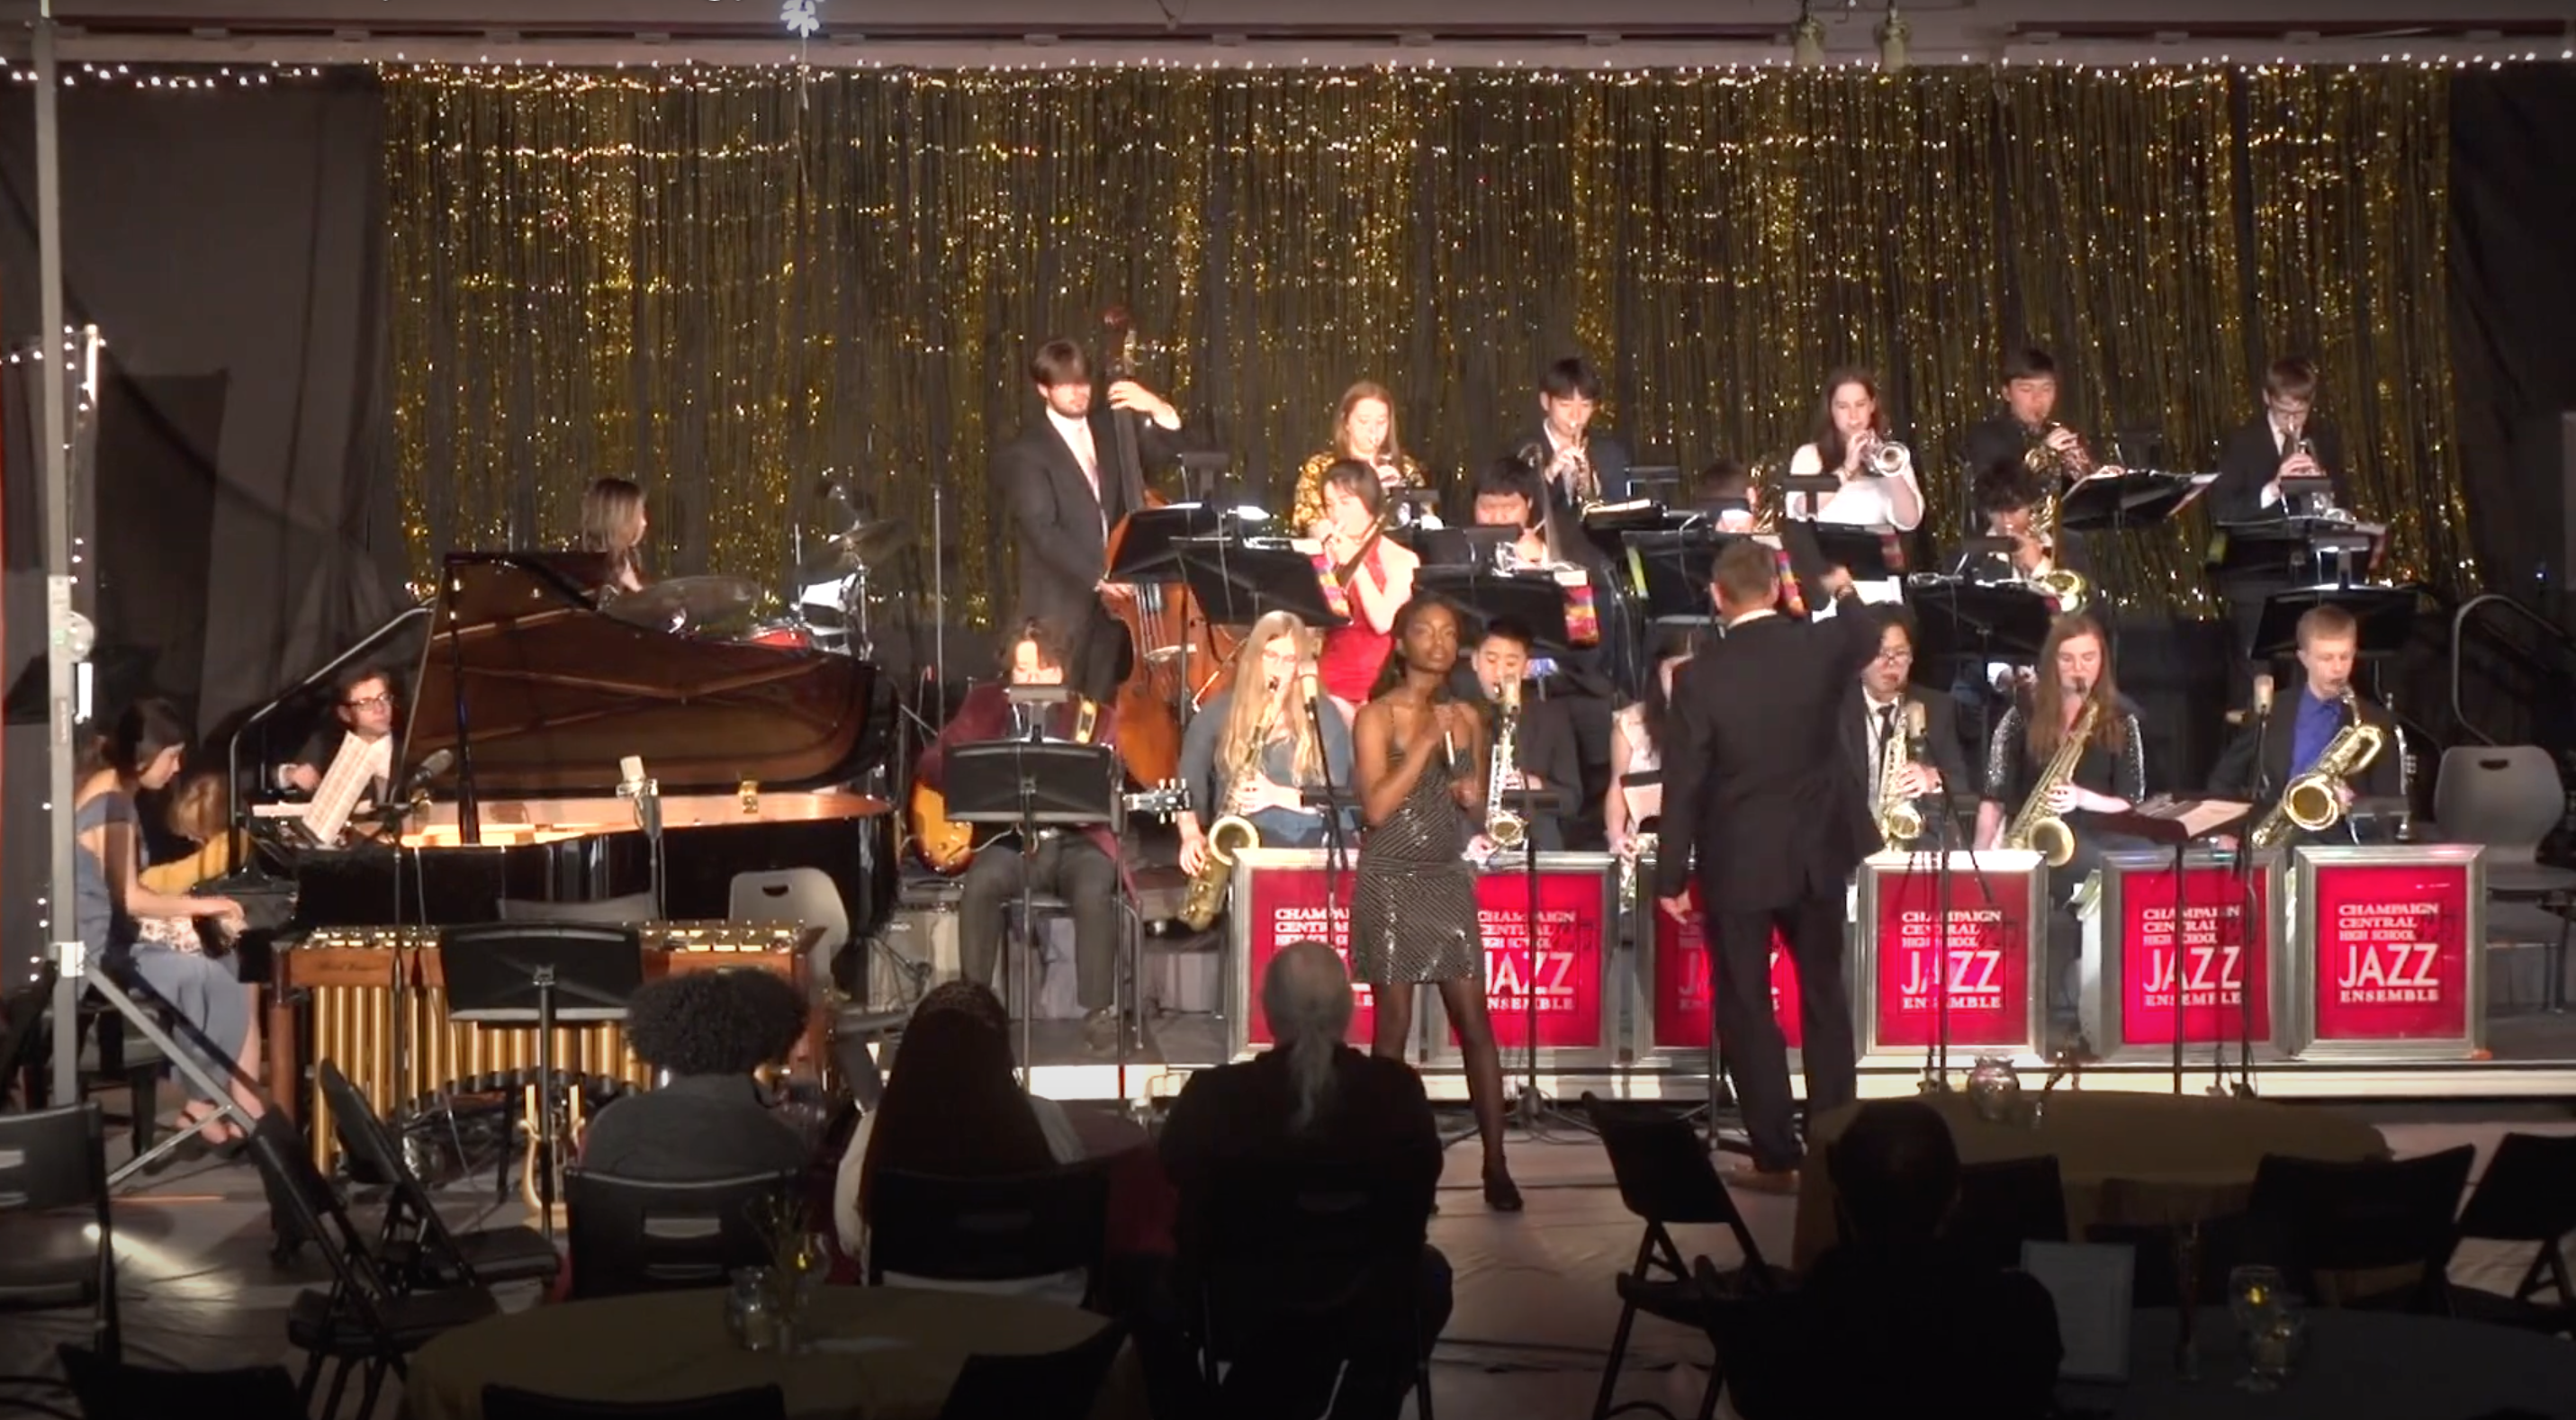 High school jazz ensemble performing on stage during a festival concert